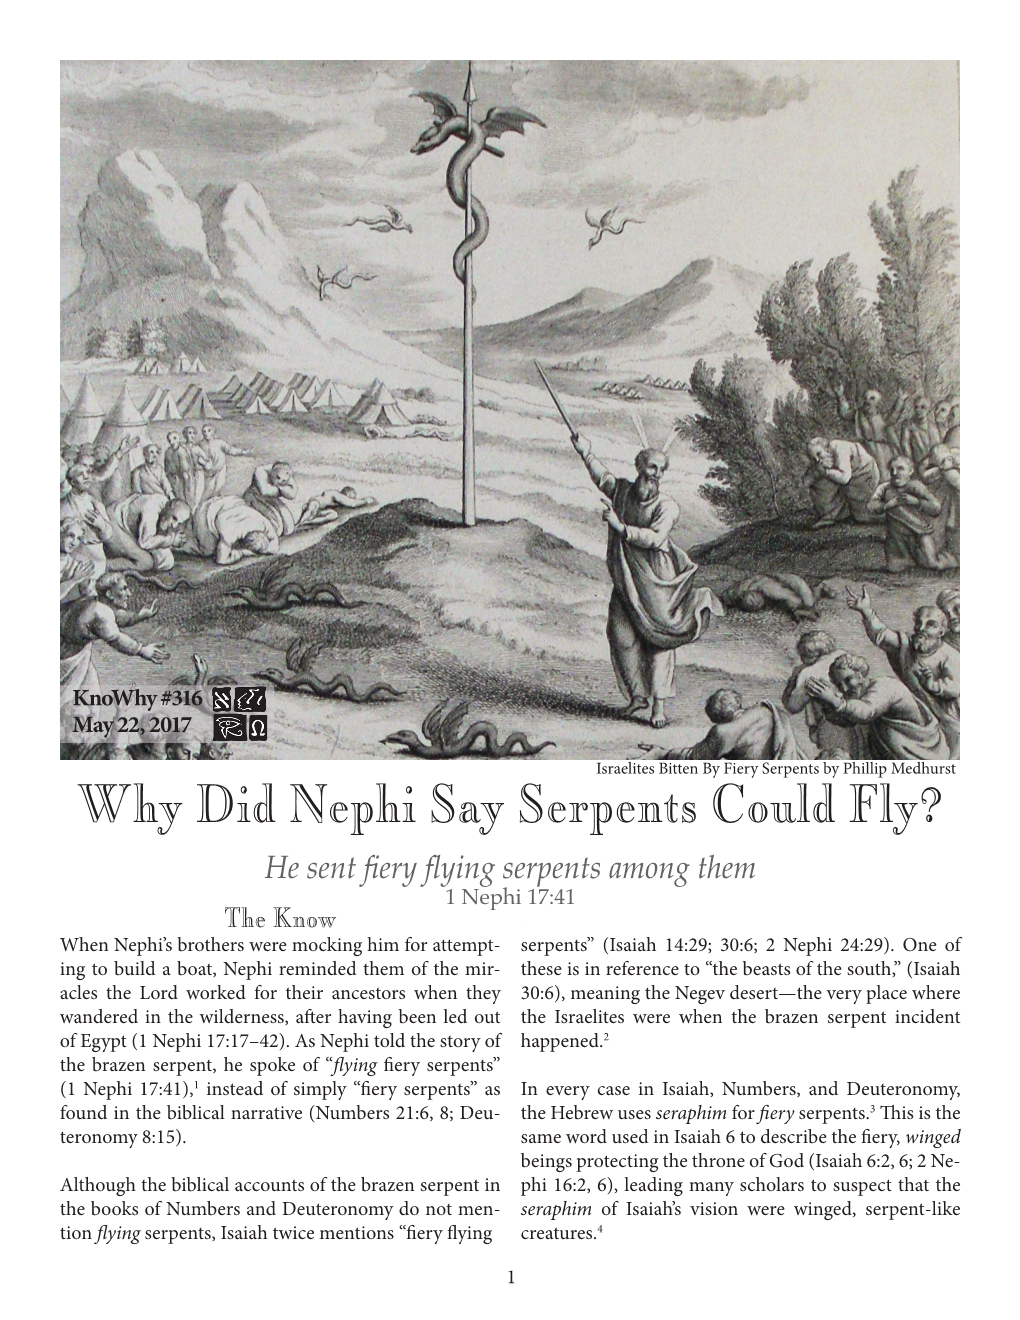 Why Did Nephi Say Serpents Could Fly?